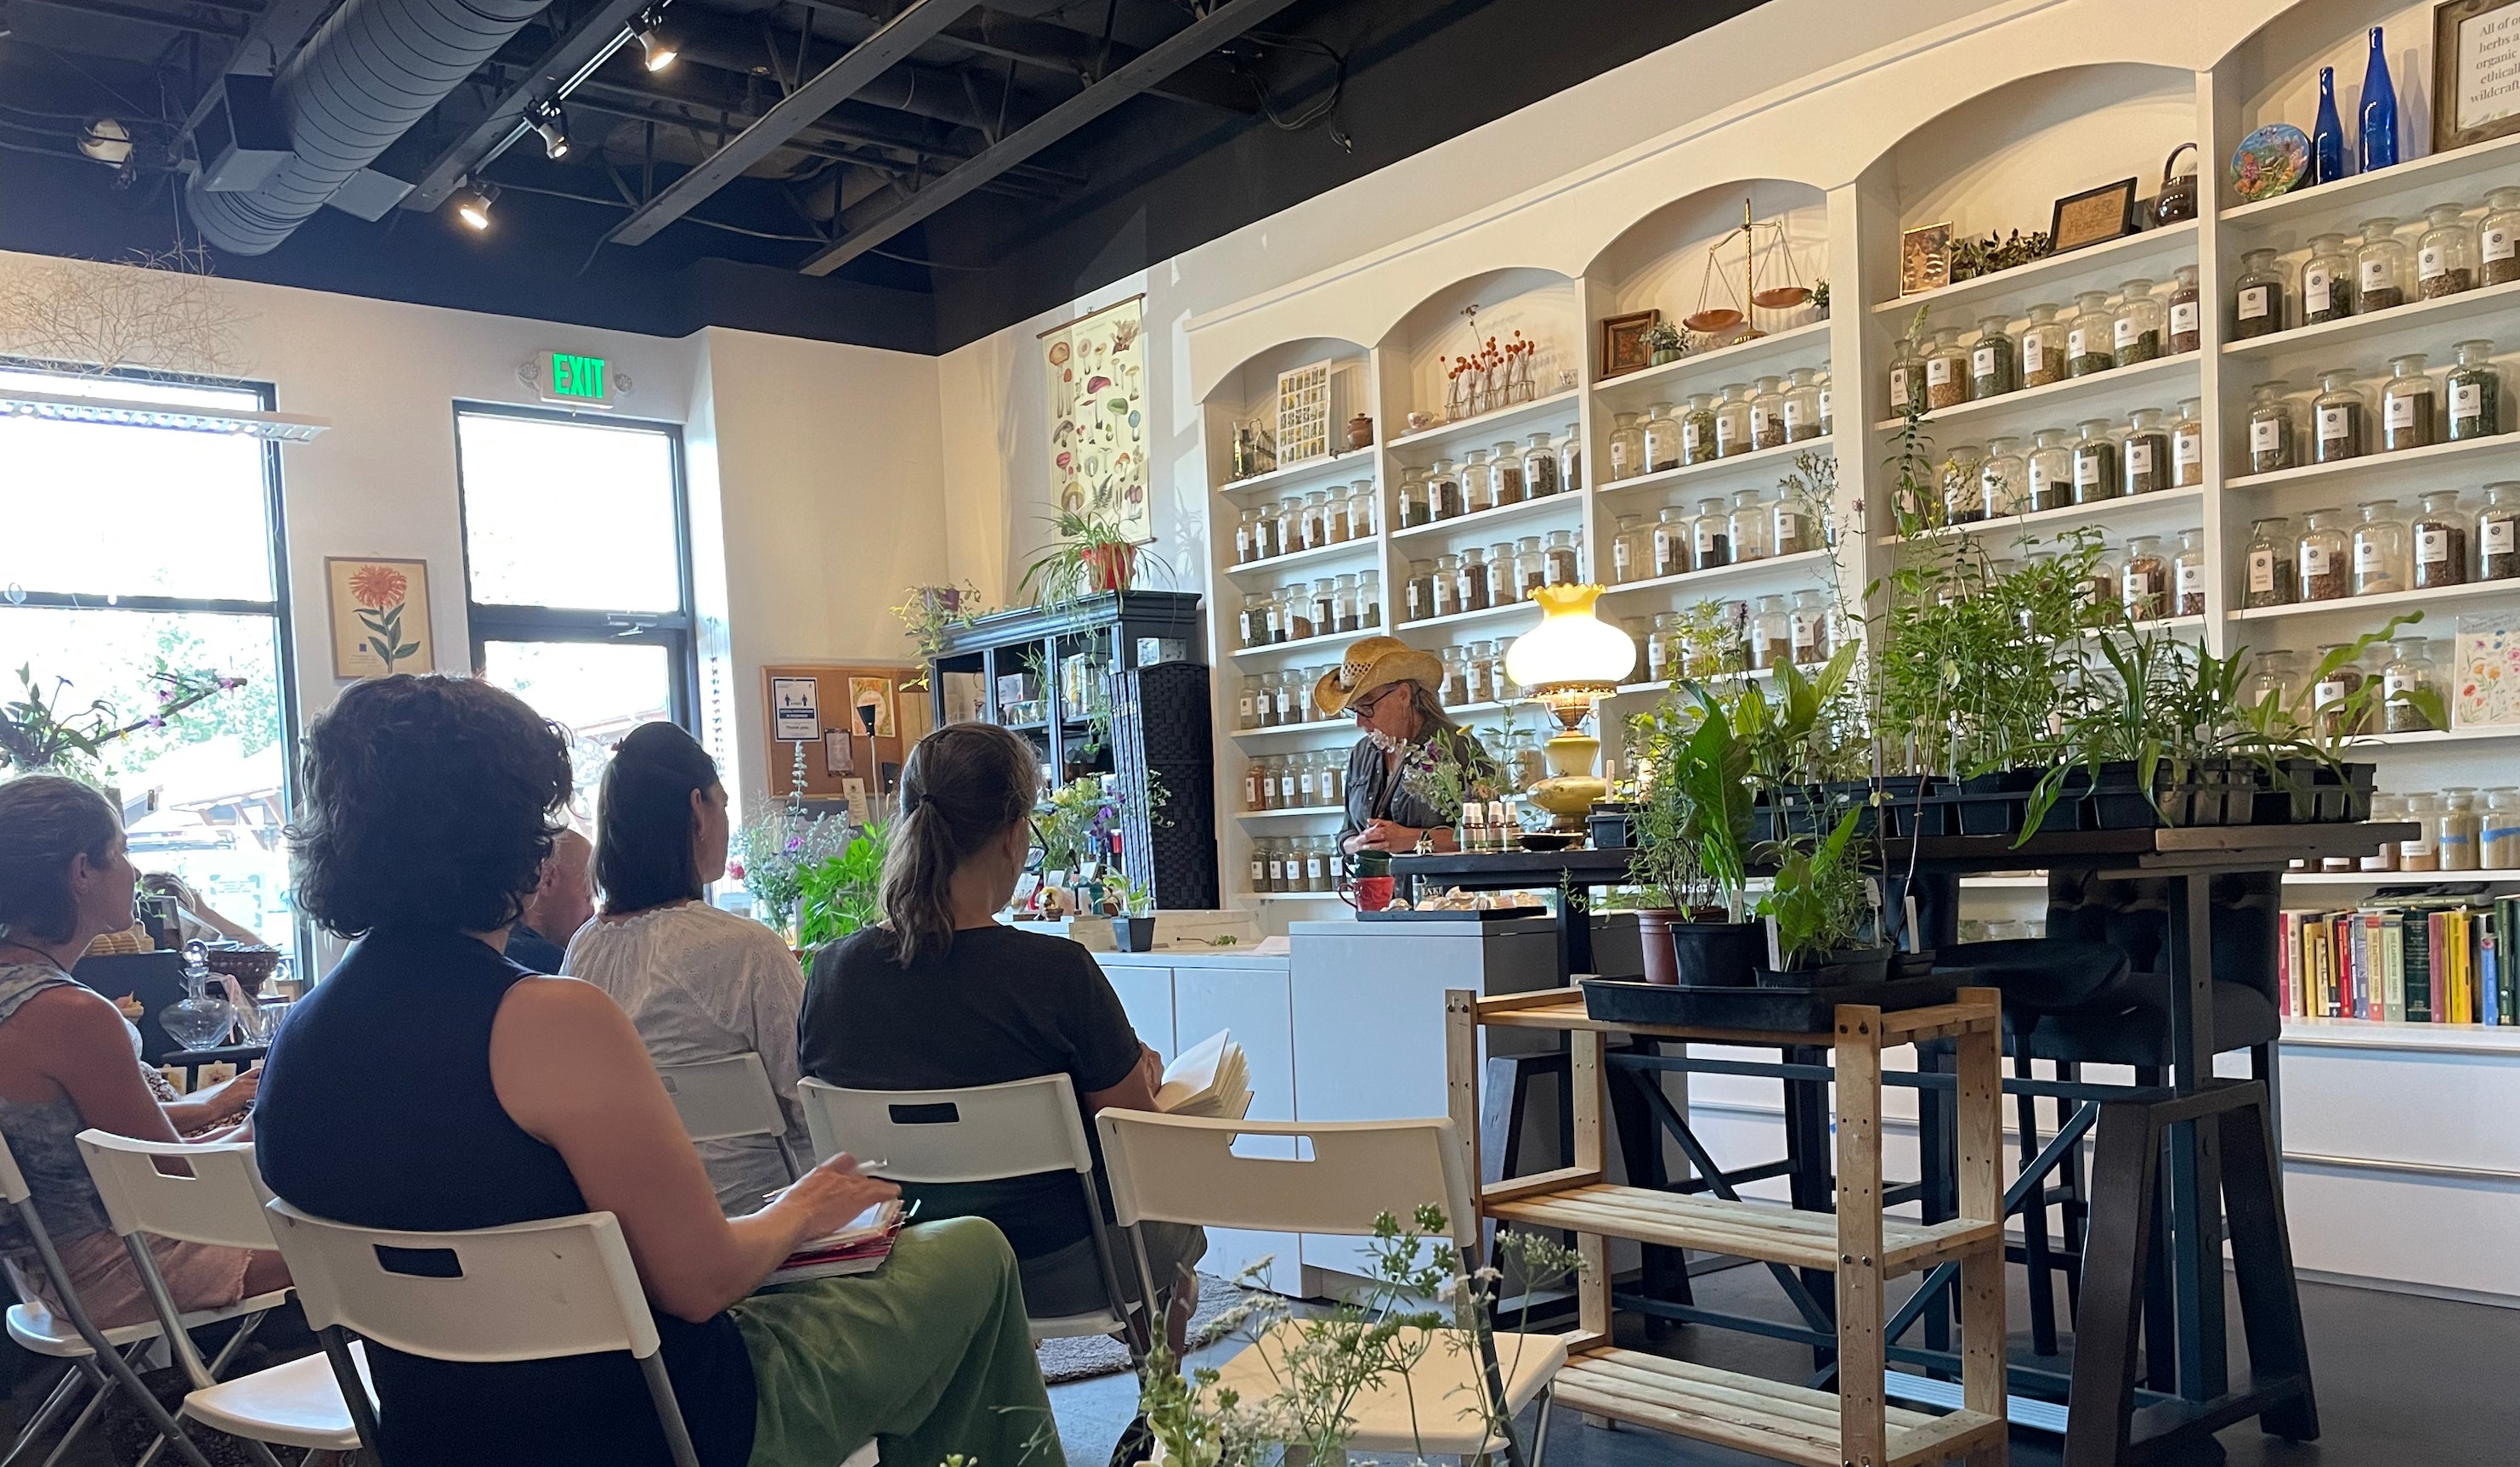 Classes & Events – The Peoples Apothecary